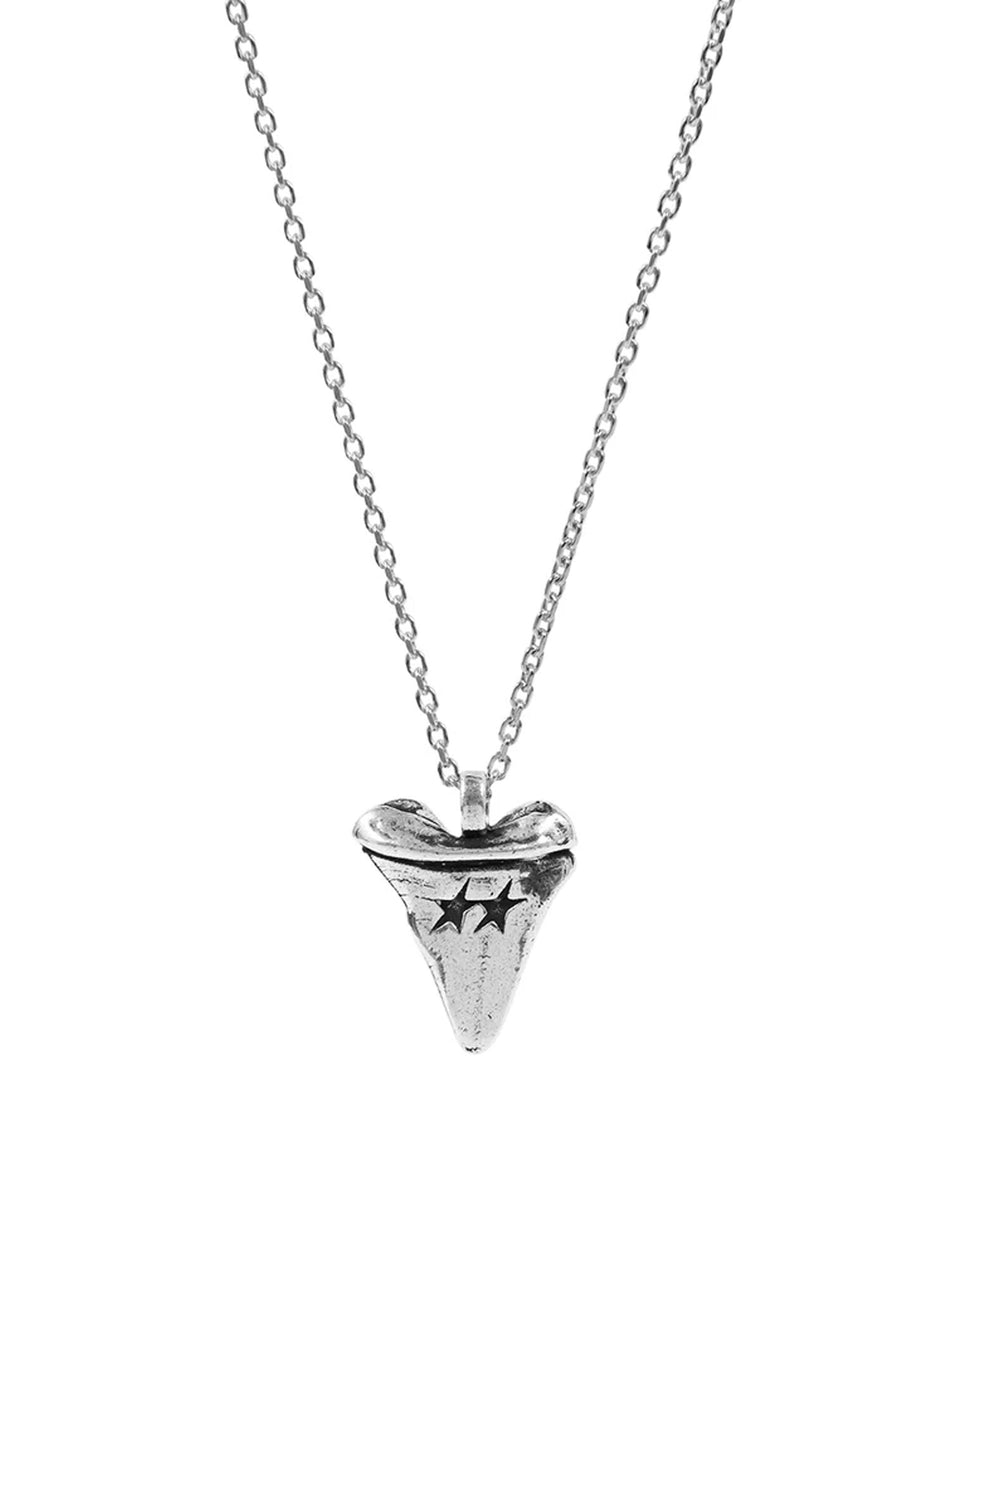 PUKAS-SURF-SHOP-NECKLACE-TWO-JEYS-SHARK